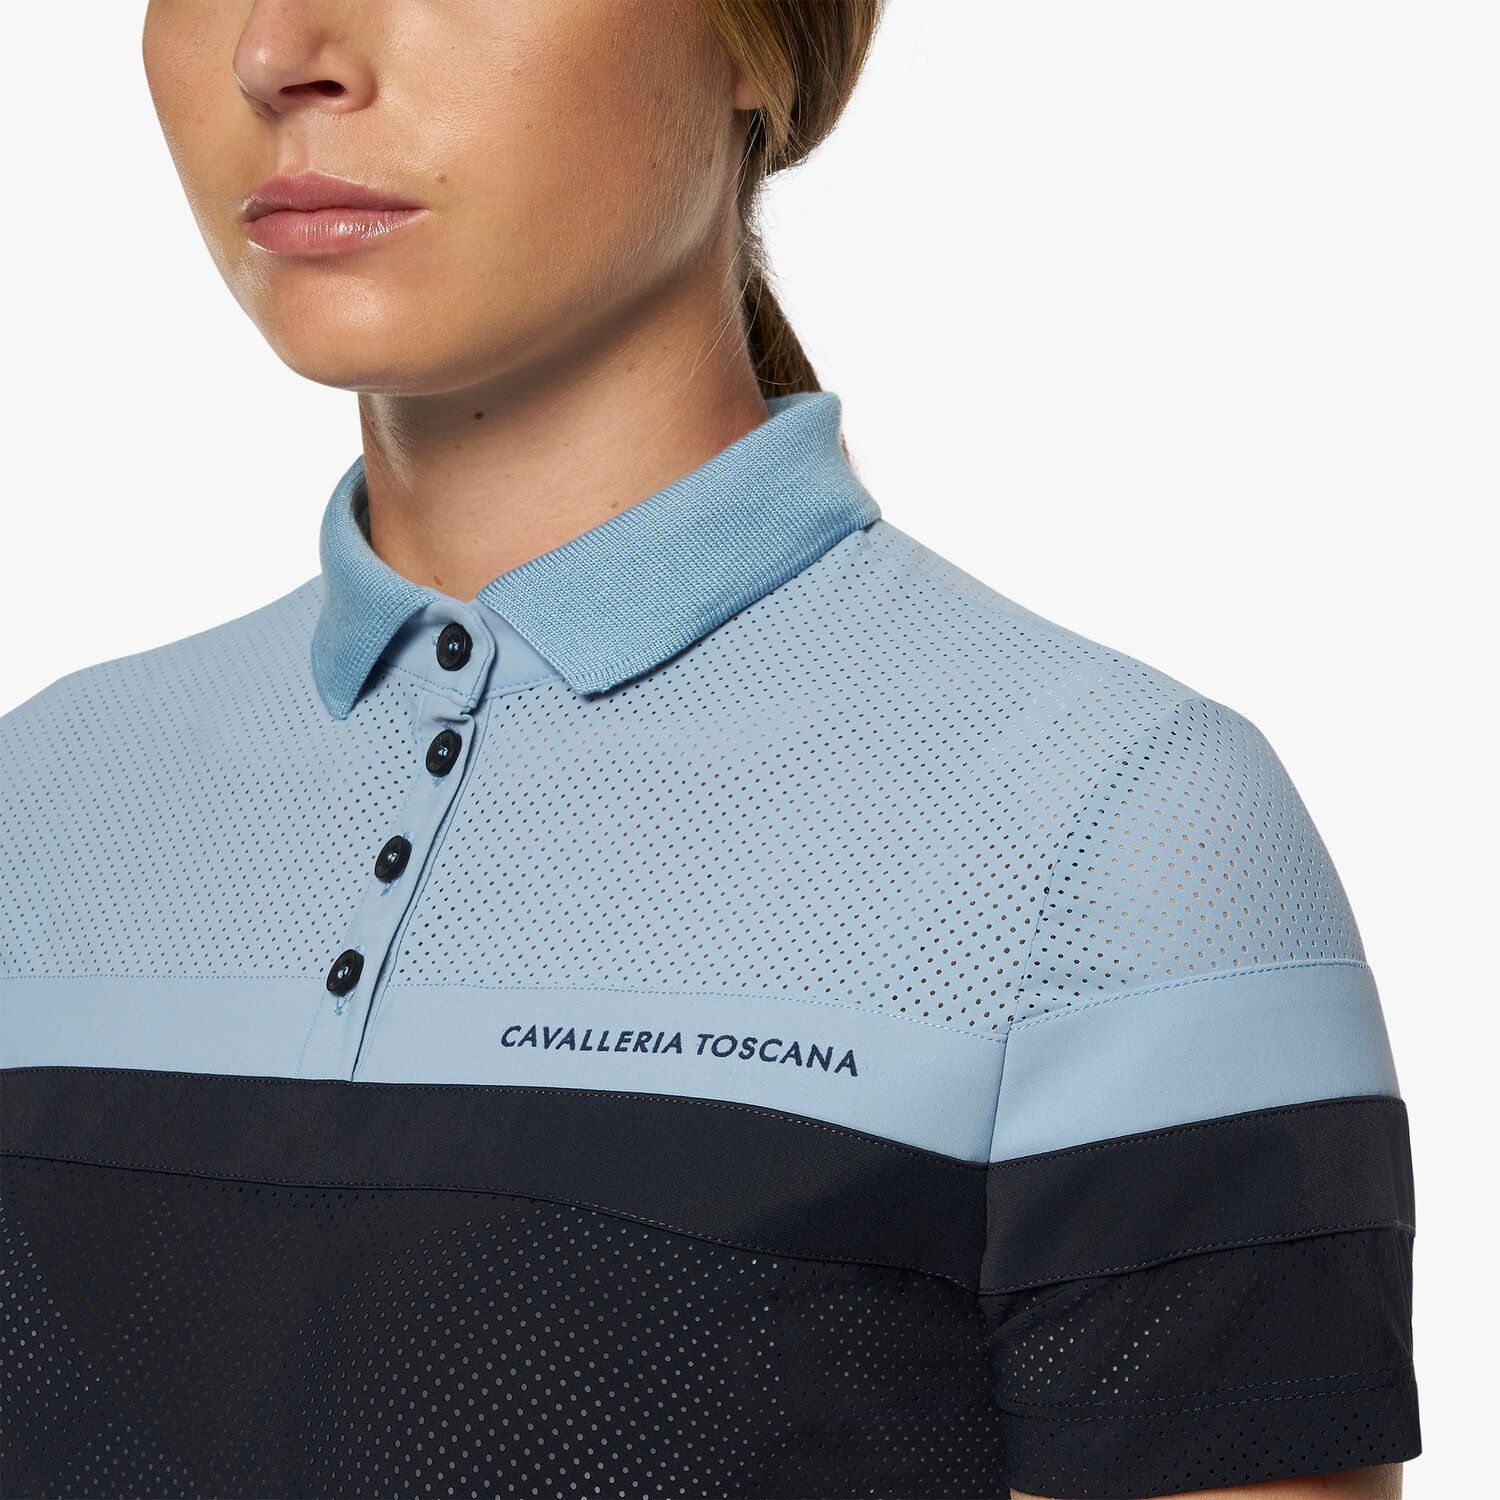 Cavalleria Toscana Women’s S/S Two Tone Perforated Jersey Polo